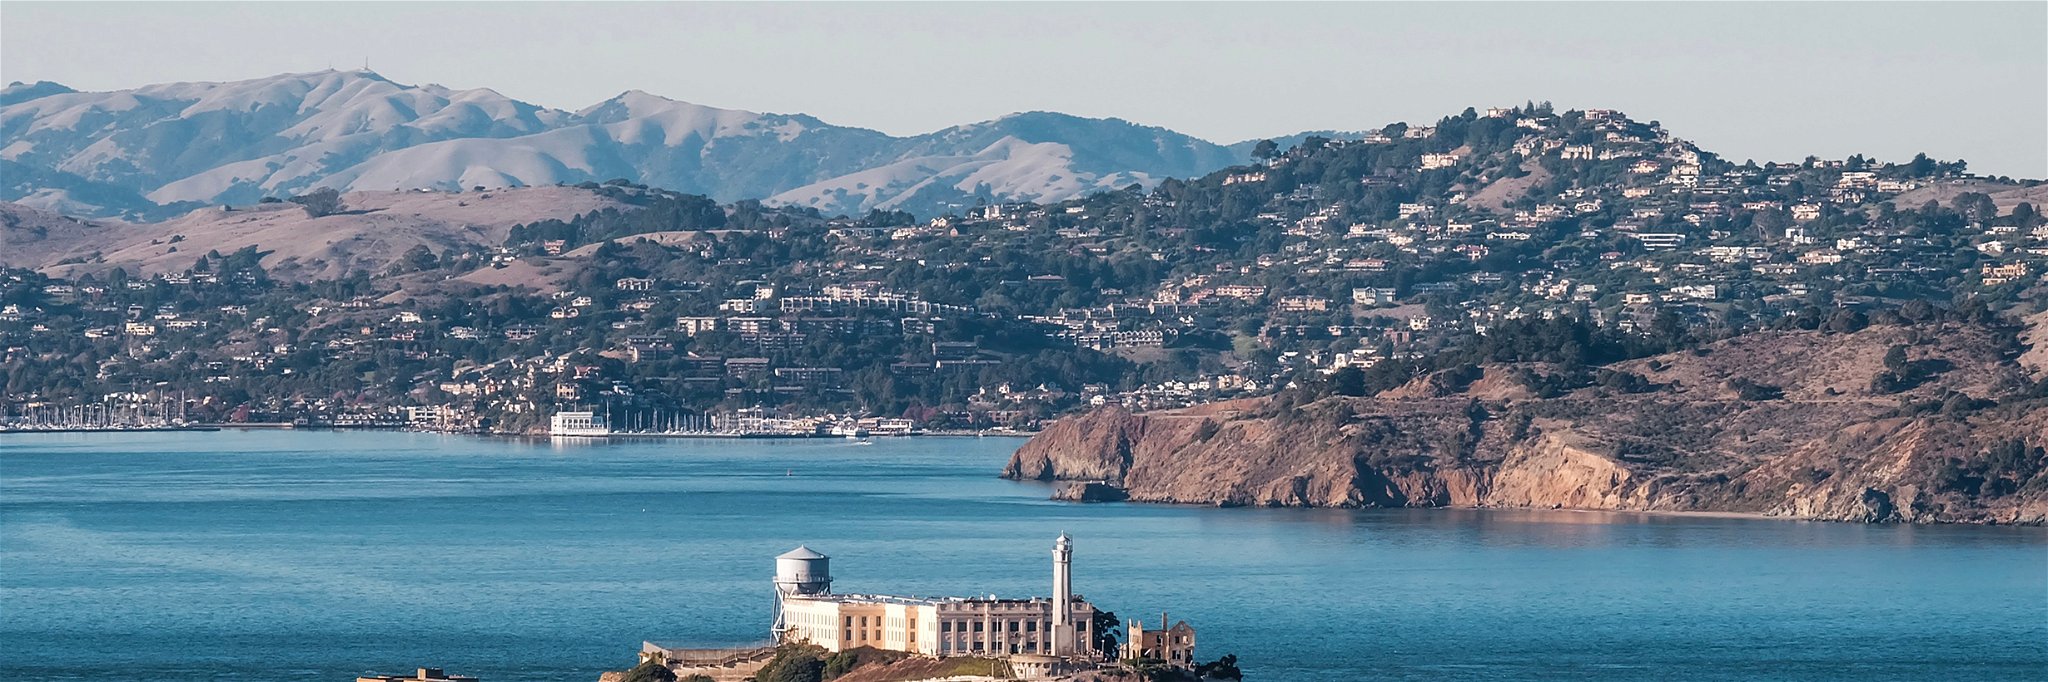 The island is one of the most famous sights in the city of San Francisco.